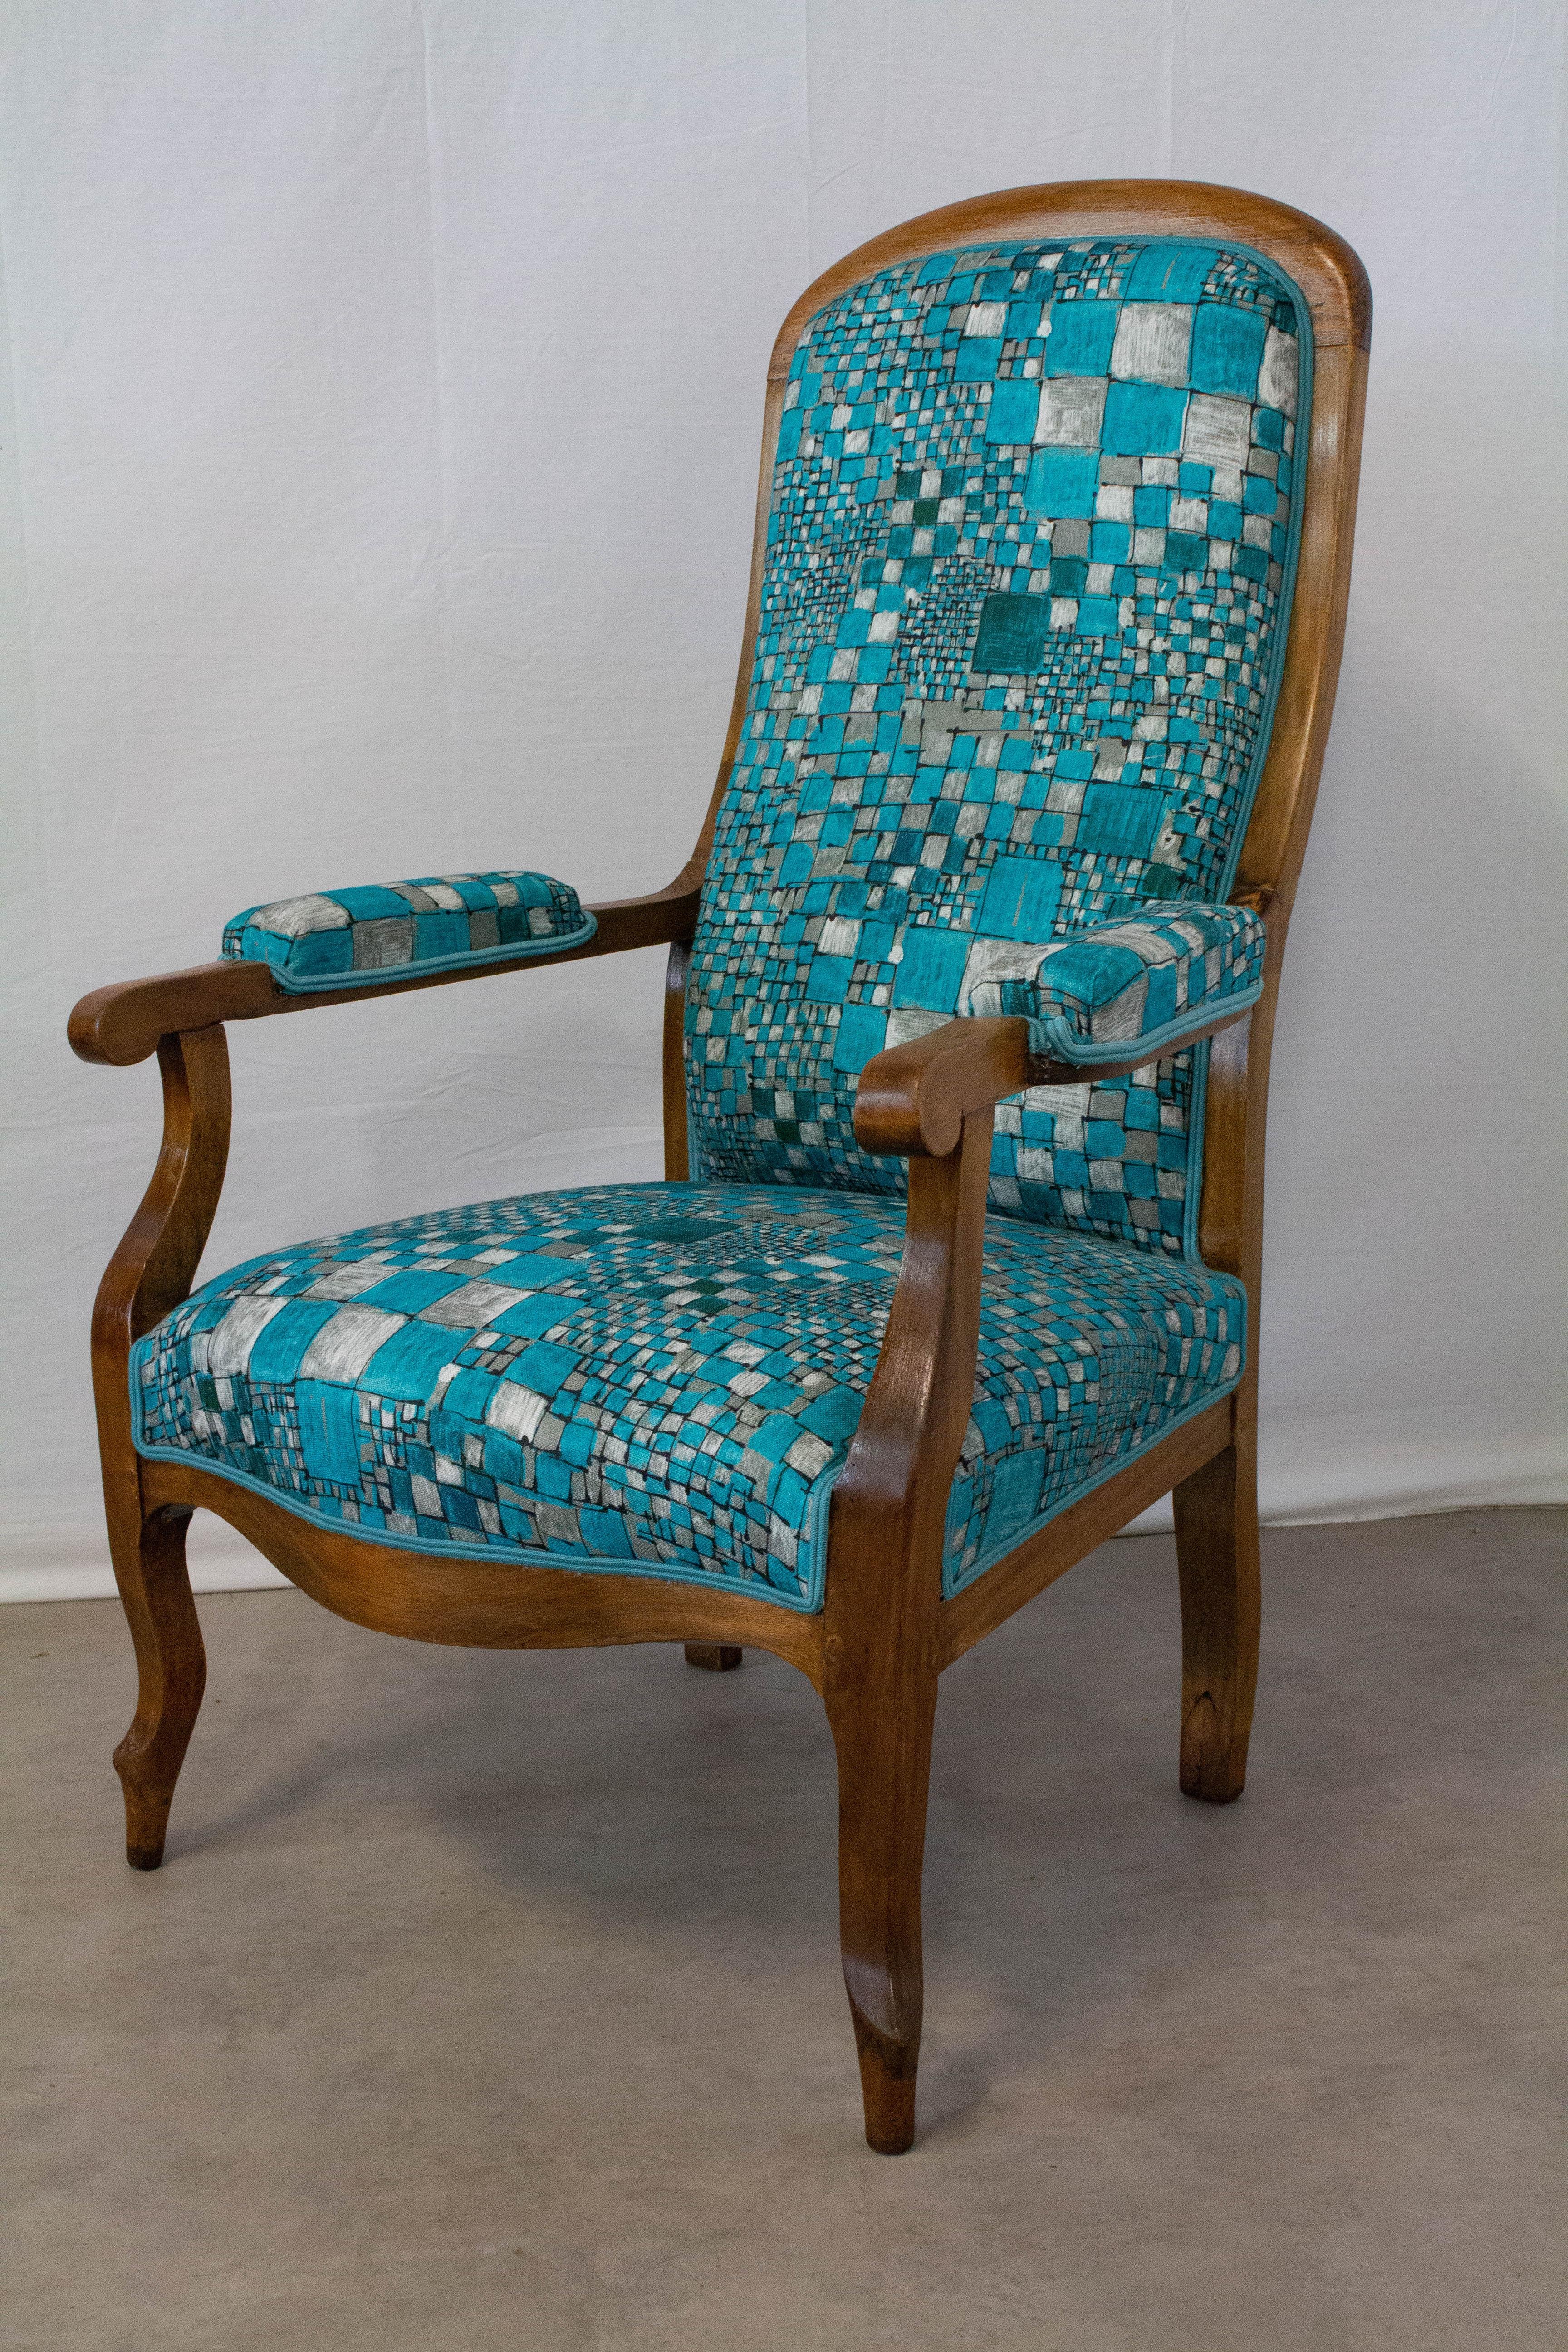 Louis Philippe armchair French 19th century Voltaire chair
This chair has been re-upholstered
Open armchair
Good antique patina
Sound and solid.
     